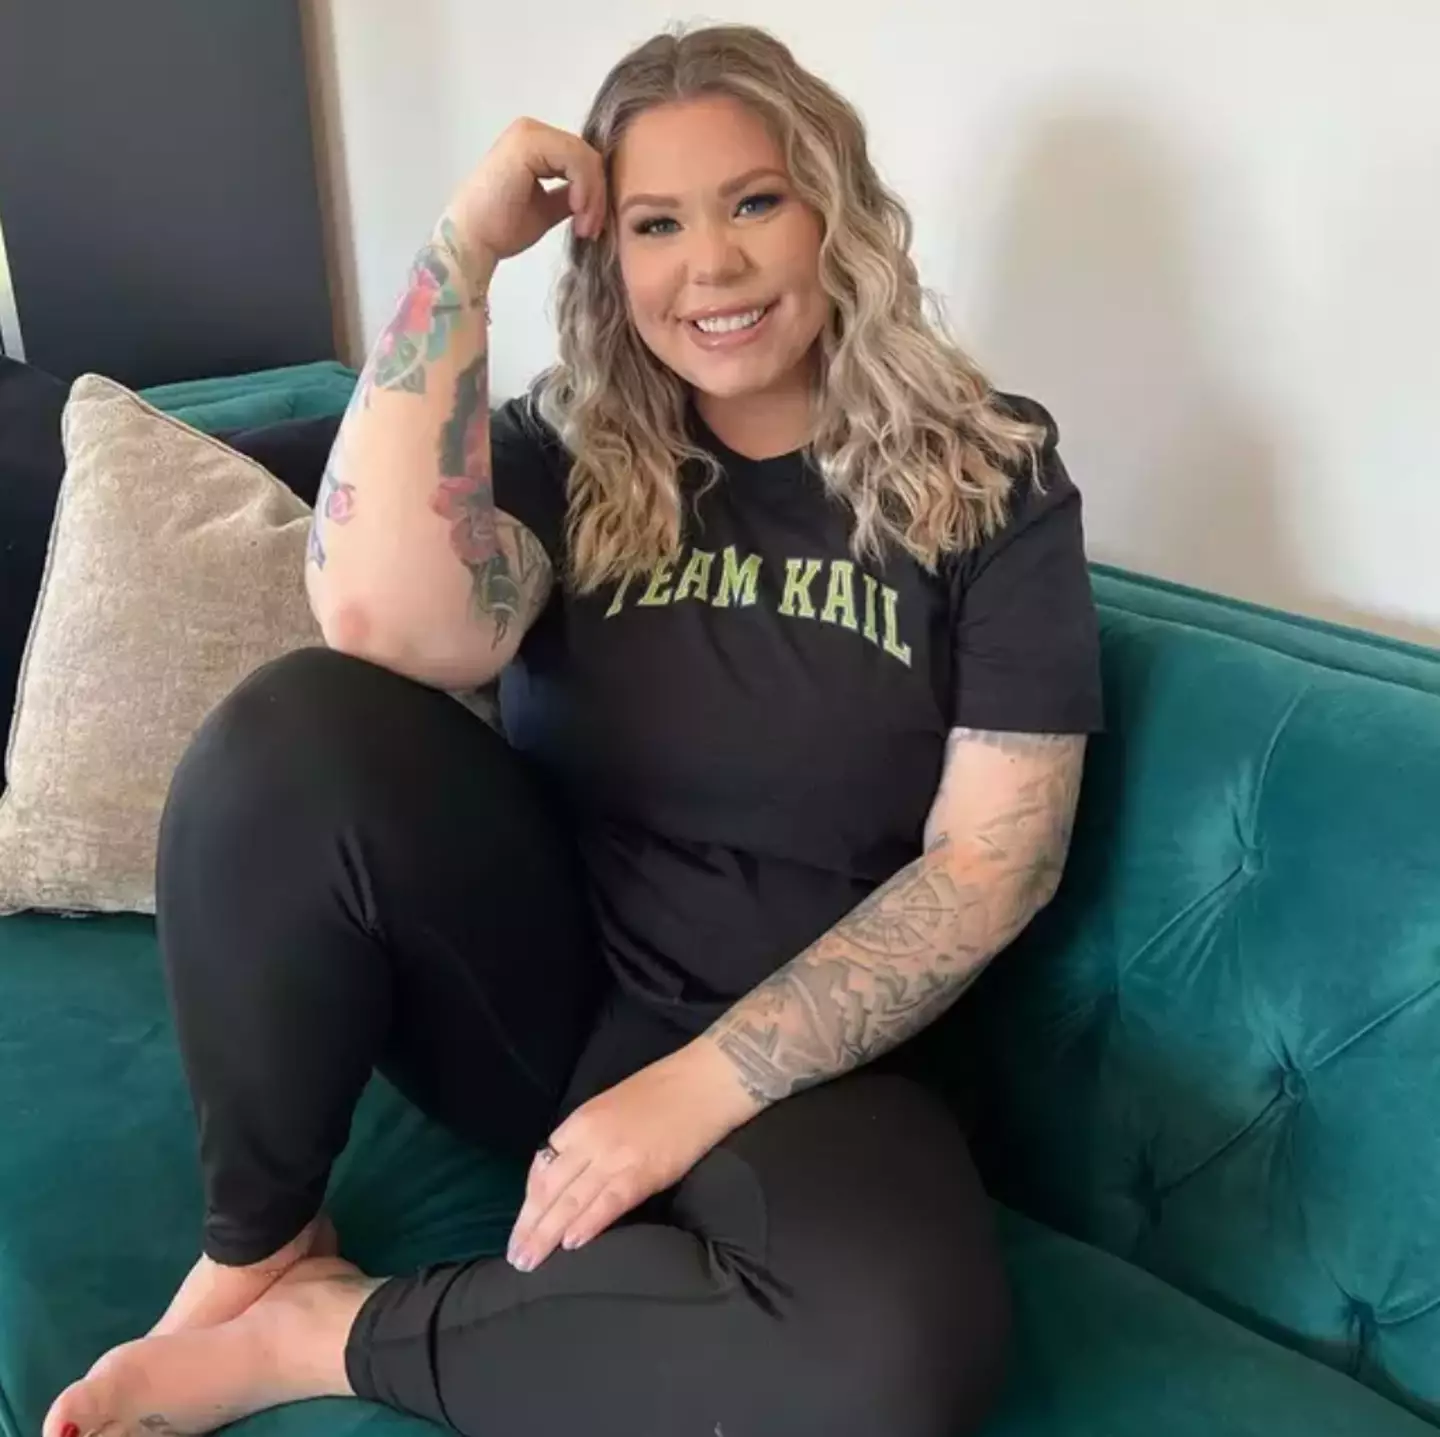 Kailyn welcomed her fifth child, Rio, secretly less than a year ago.